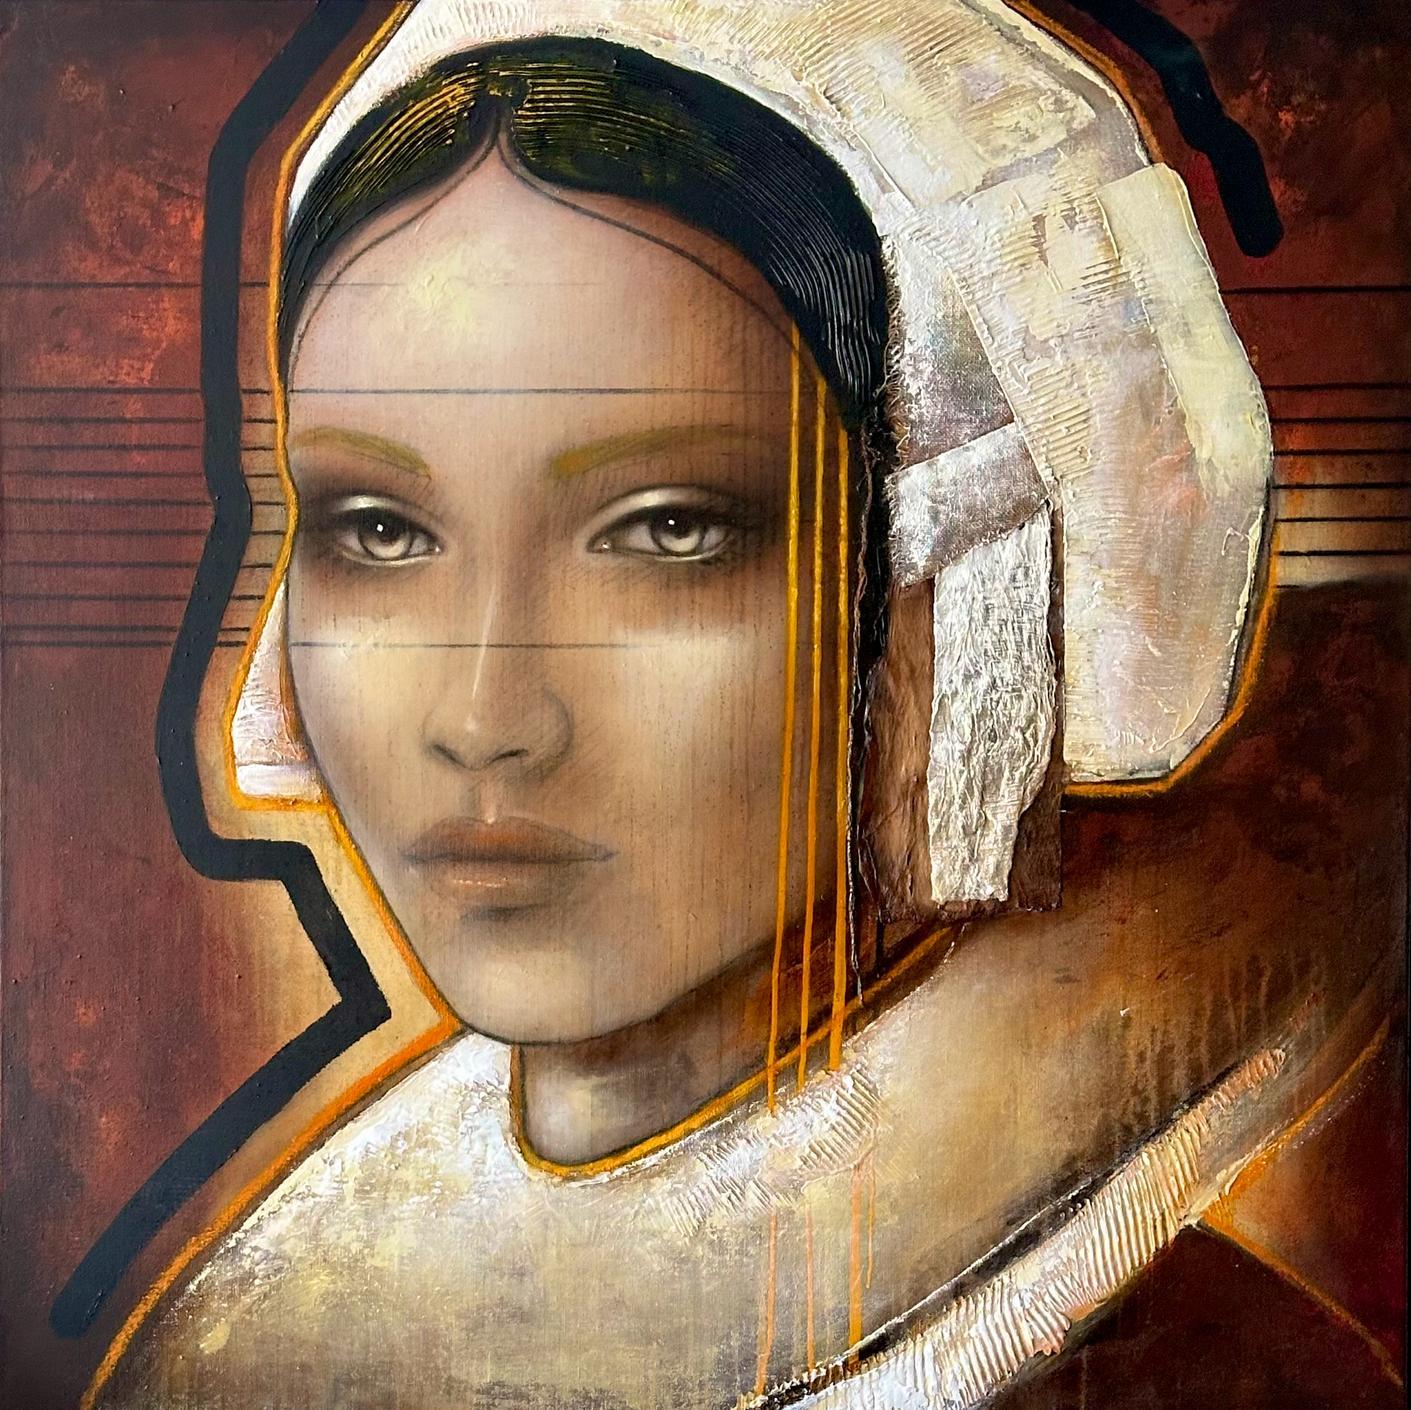 Ger Doornink Figurative Painting - The Look - 21st Century, Contemporary, Figurative, Portrait Painting, Oil